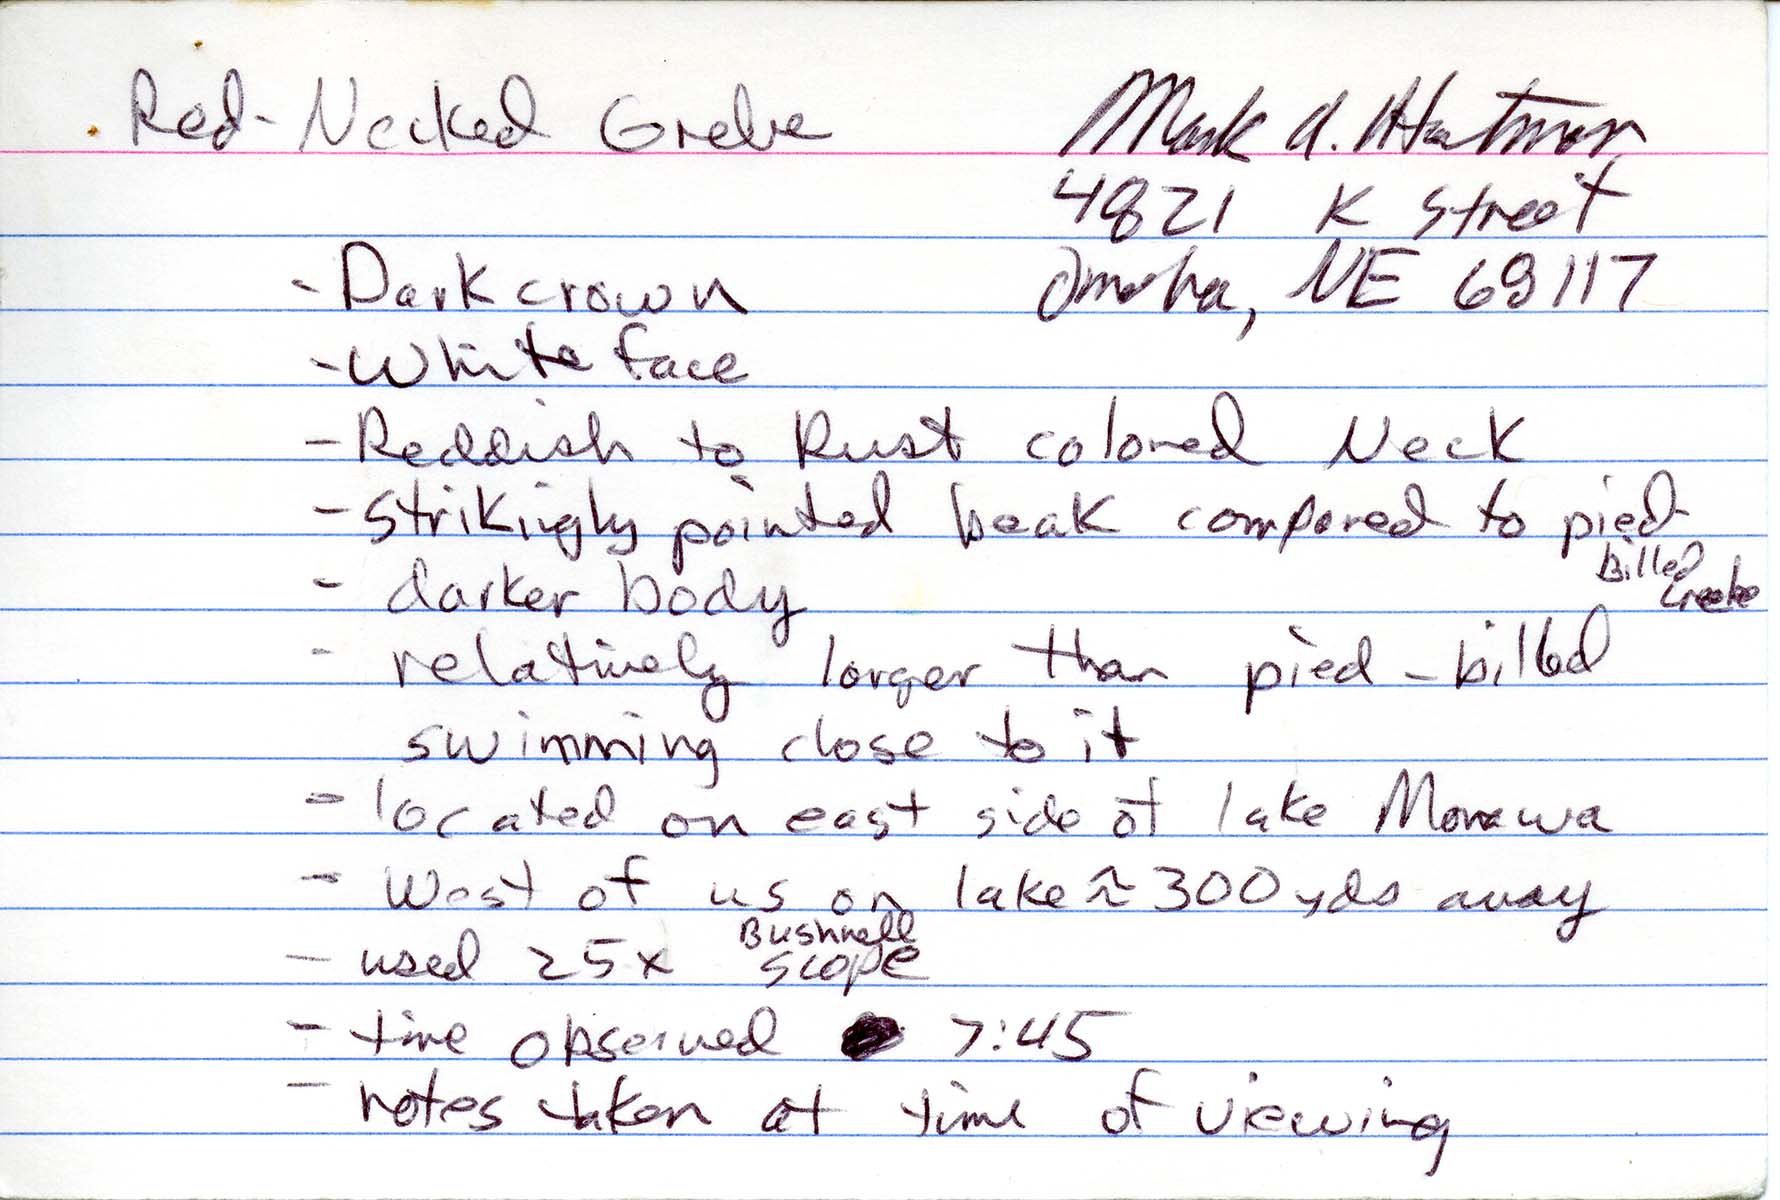 Field notes contributed by Mark A. Hartman, spring 1988